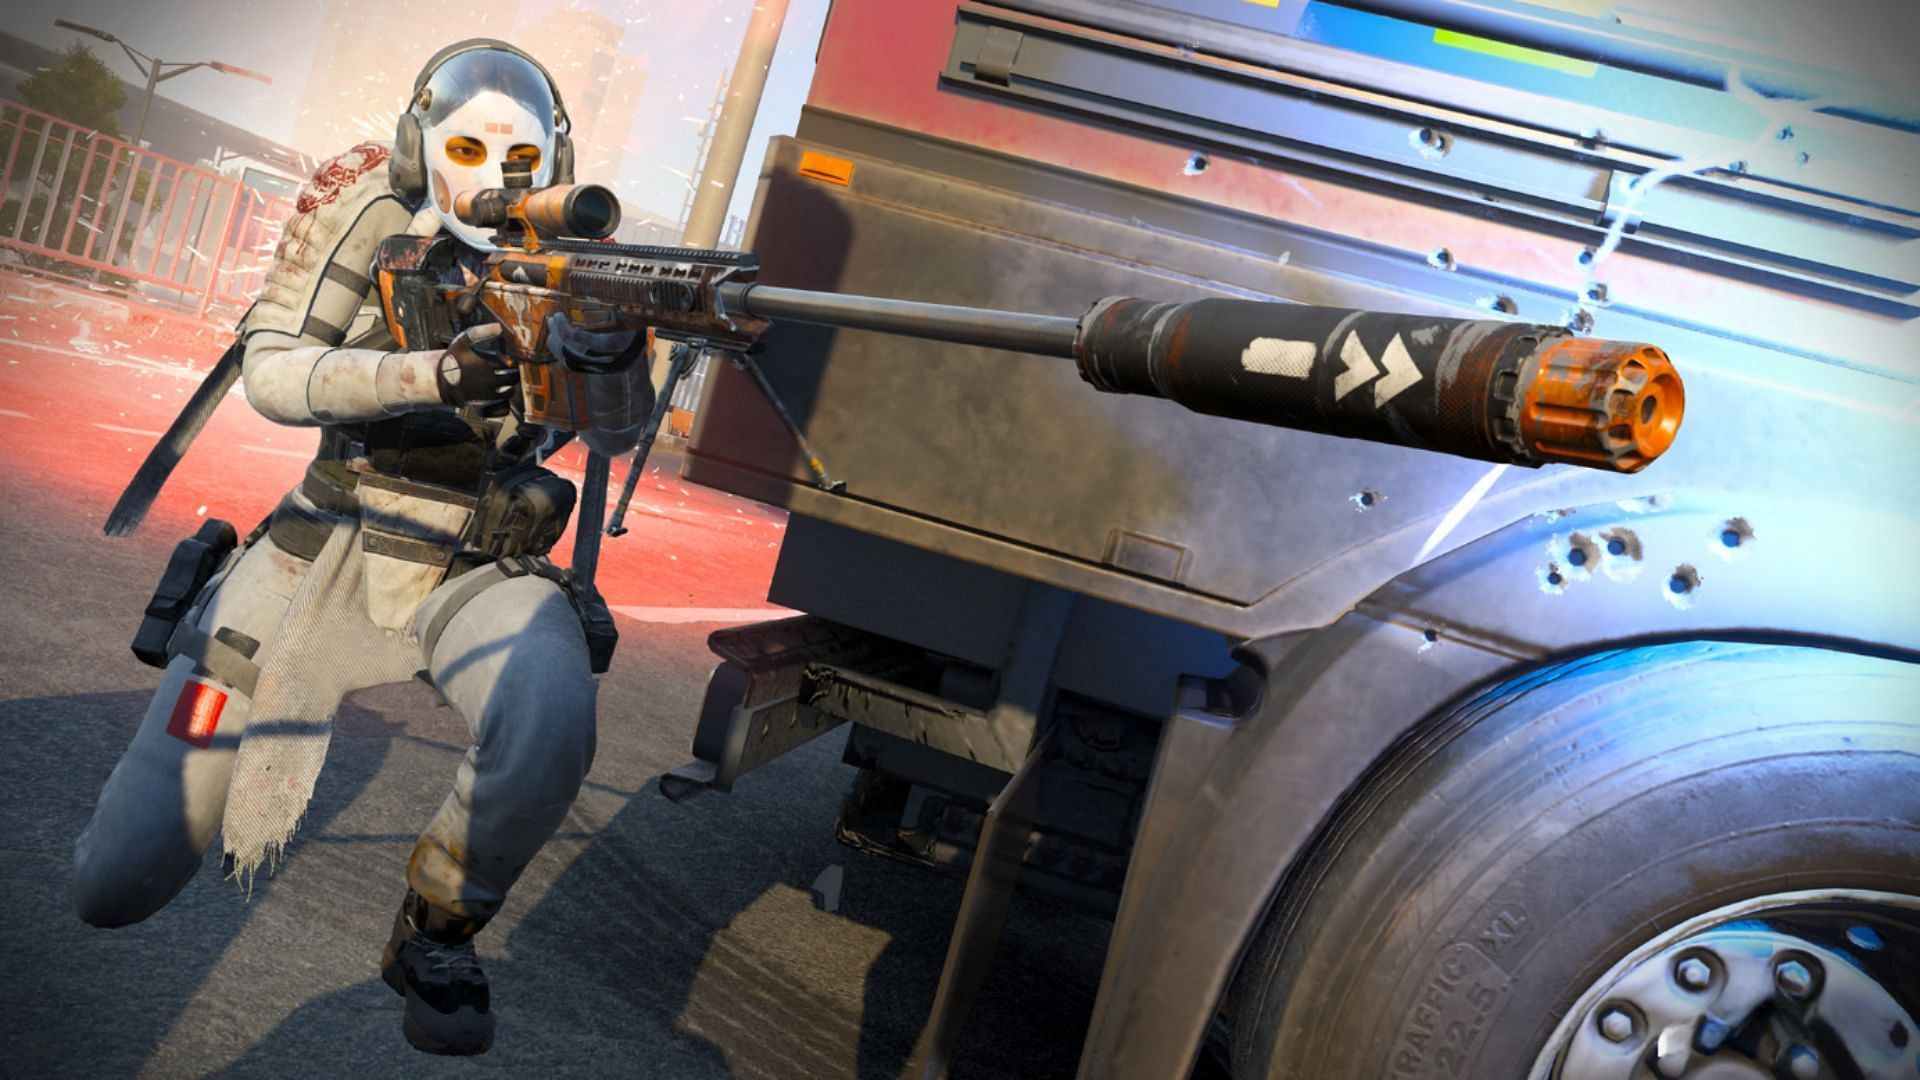 An Operator using a Sniper Rifle while hiding behind a car in Warzone